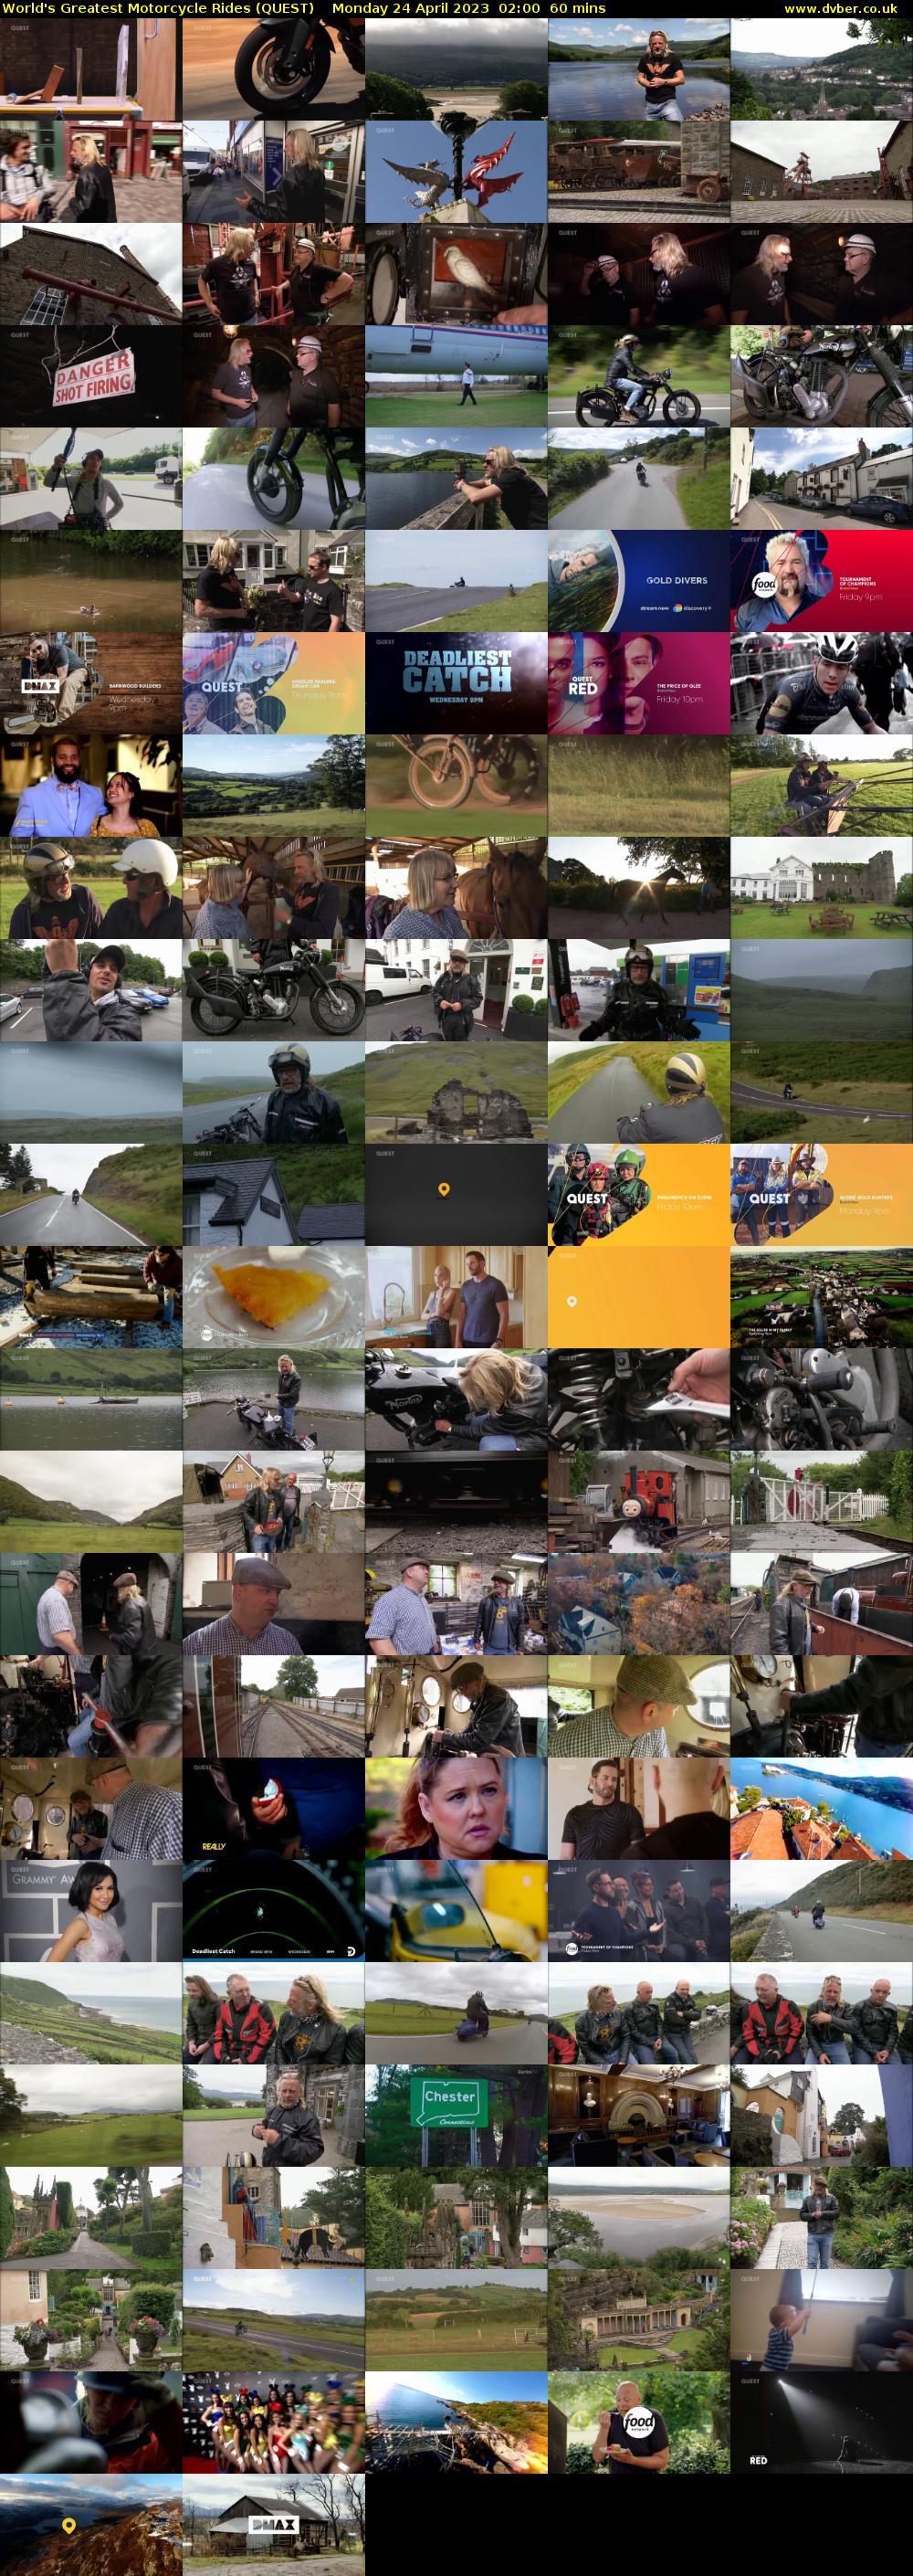 World's Greatest Motorcycle Rides (QUEST) Monday 24 April 2023 02:00 - 03:00